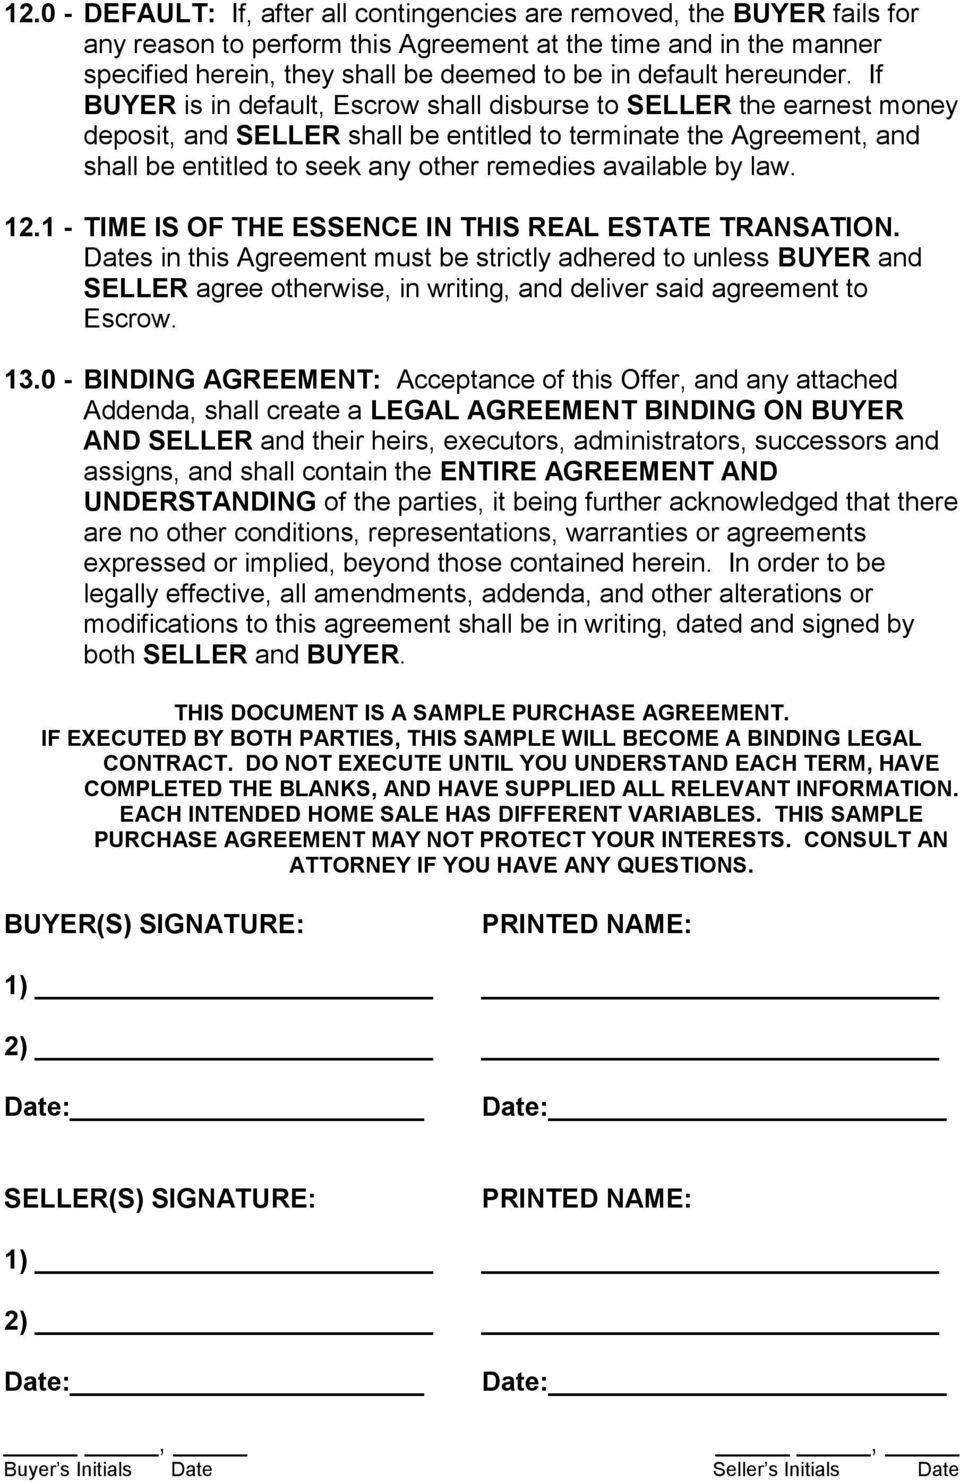 If BUYER is in default, Escrow shall disburse to SELLER the earnest money deposit, and SELLER shall be entitled to terminate the Agreement, and shall be entitled to seek any other remedies available